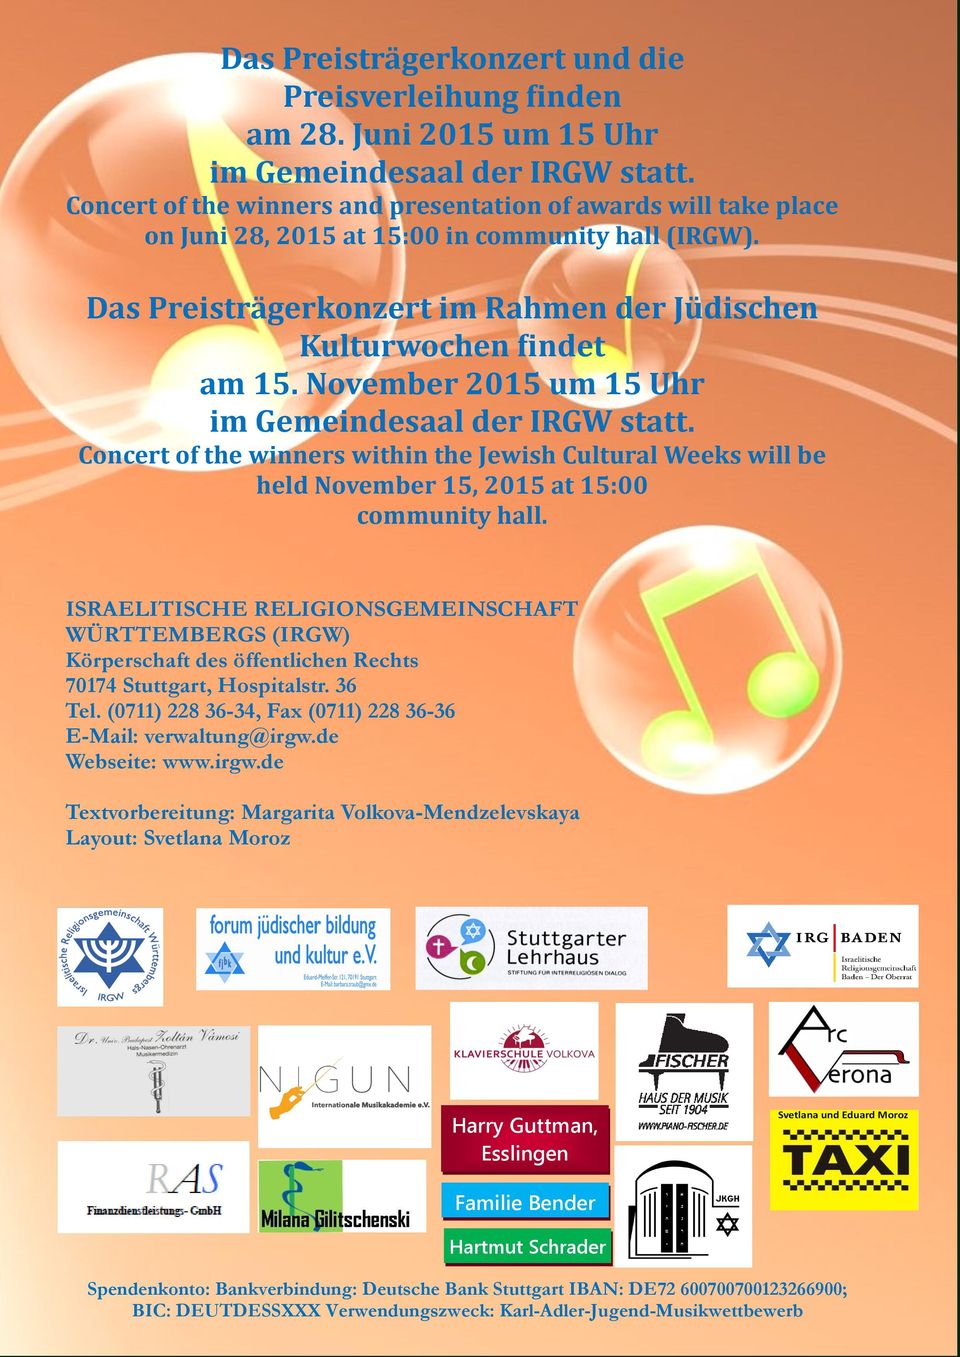 November 2015 um 15 Uhr im Gemeindesaal der IRGW statt. Concert of the winners within the Jewish Cultural Weeks will be held November 15, 2015 at 15:00 community hall.